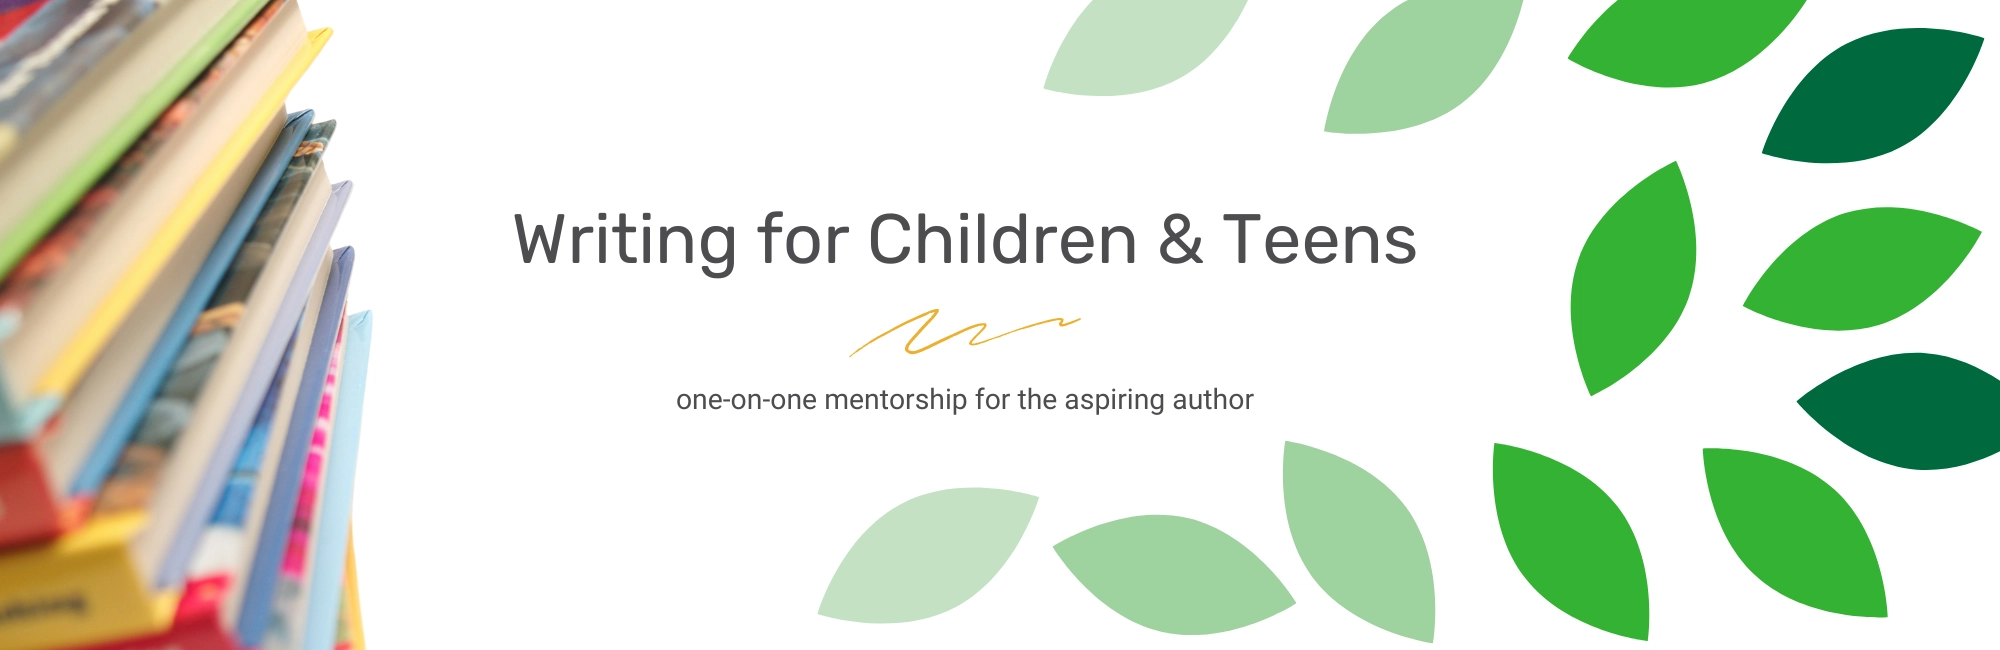 Writing for Children & Teens. One-on-one mentorship for the aspiring author. Start today by submitting a writing sample!